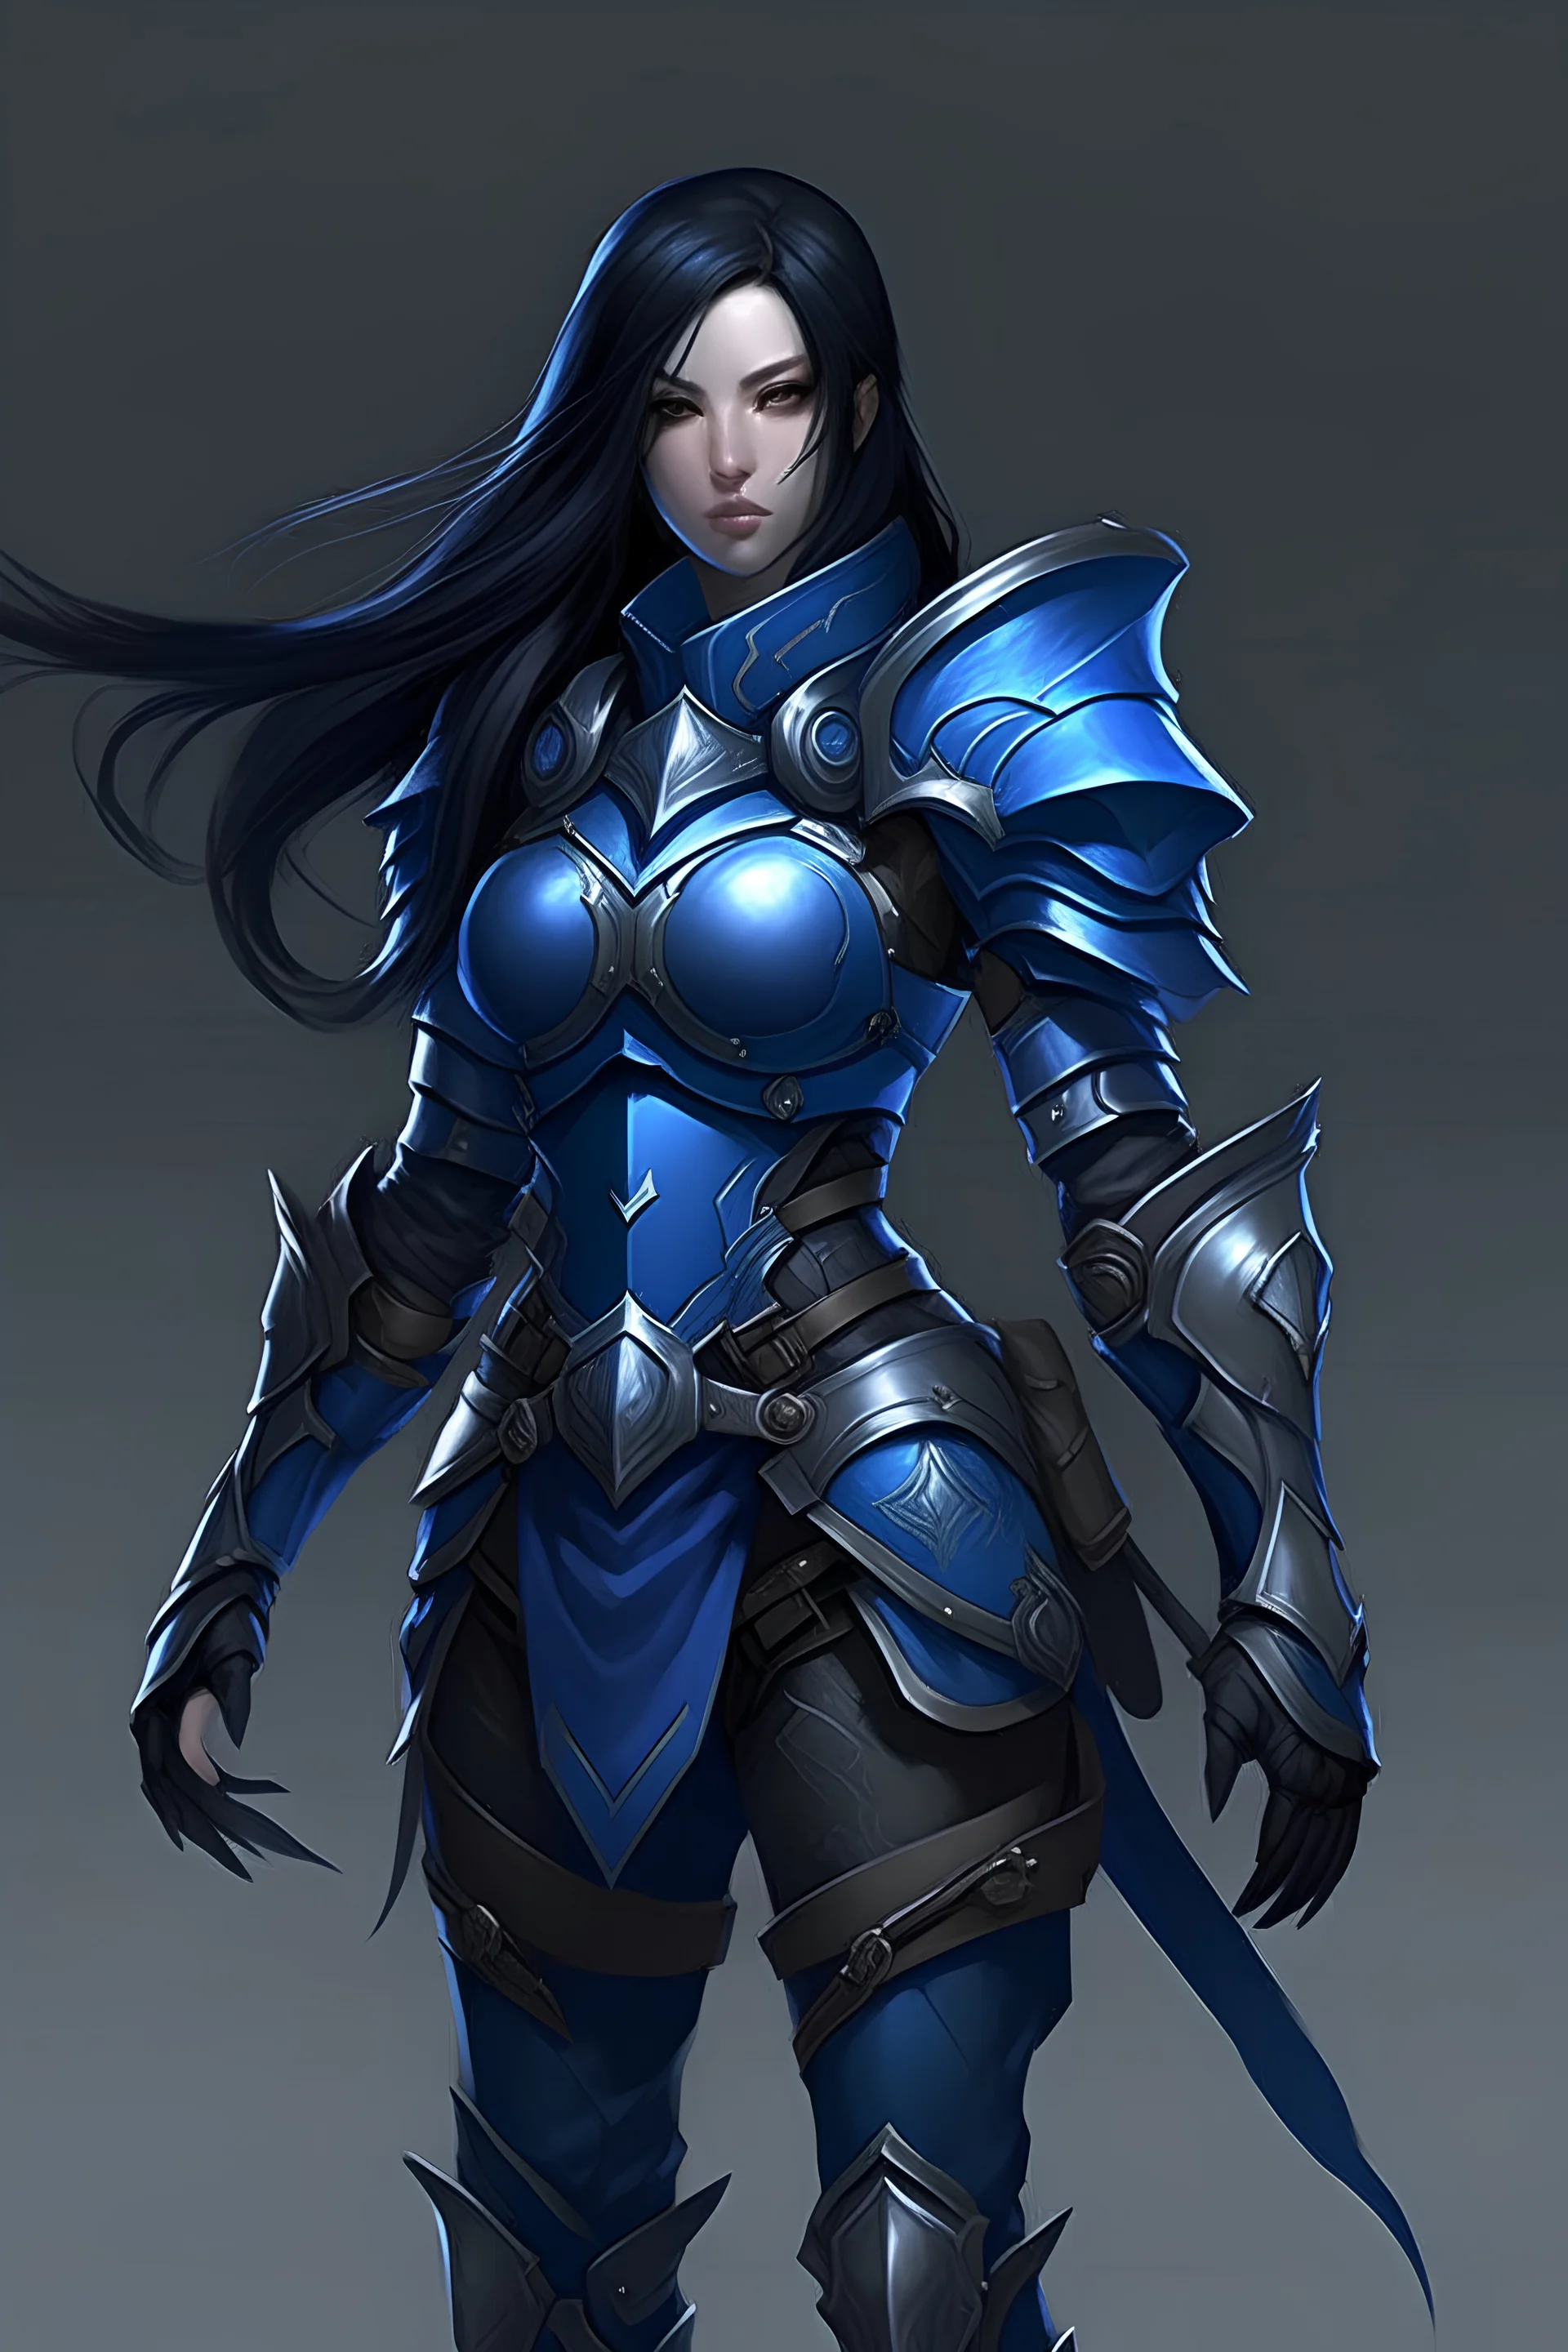 female with long black hair, wearing blue metal armor, whole body